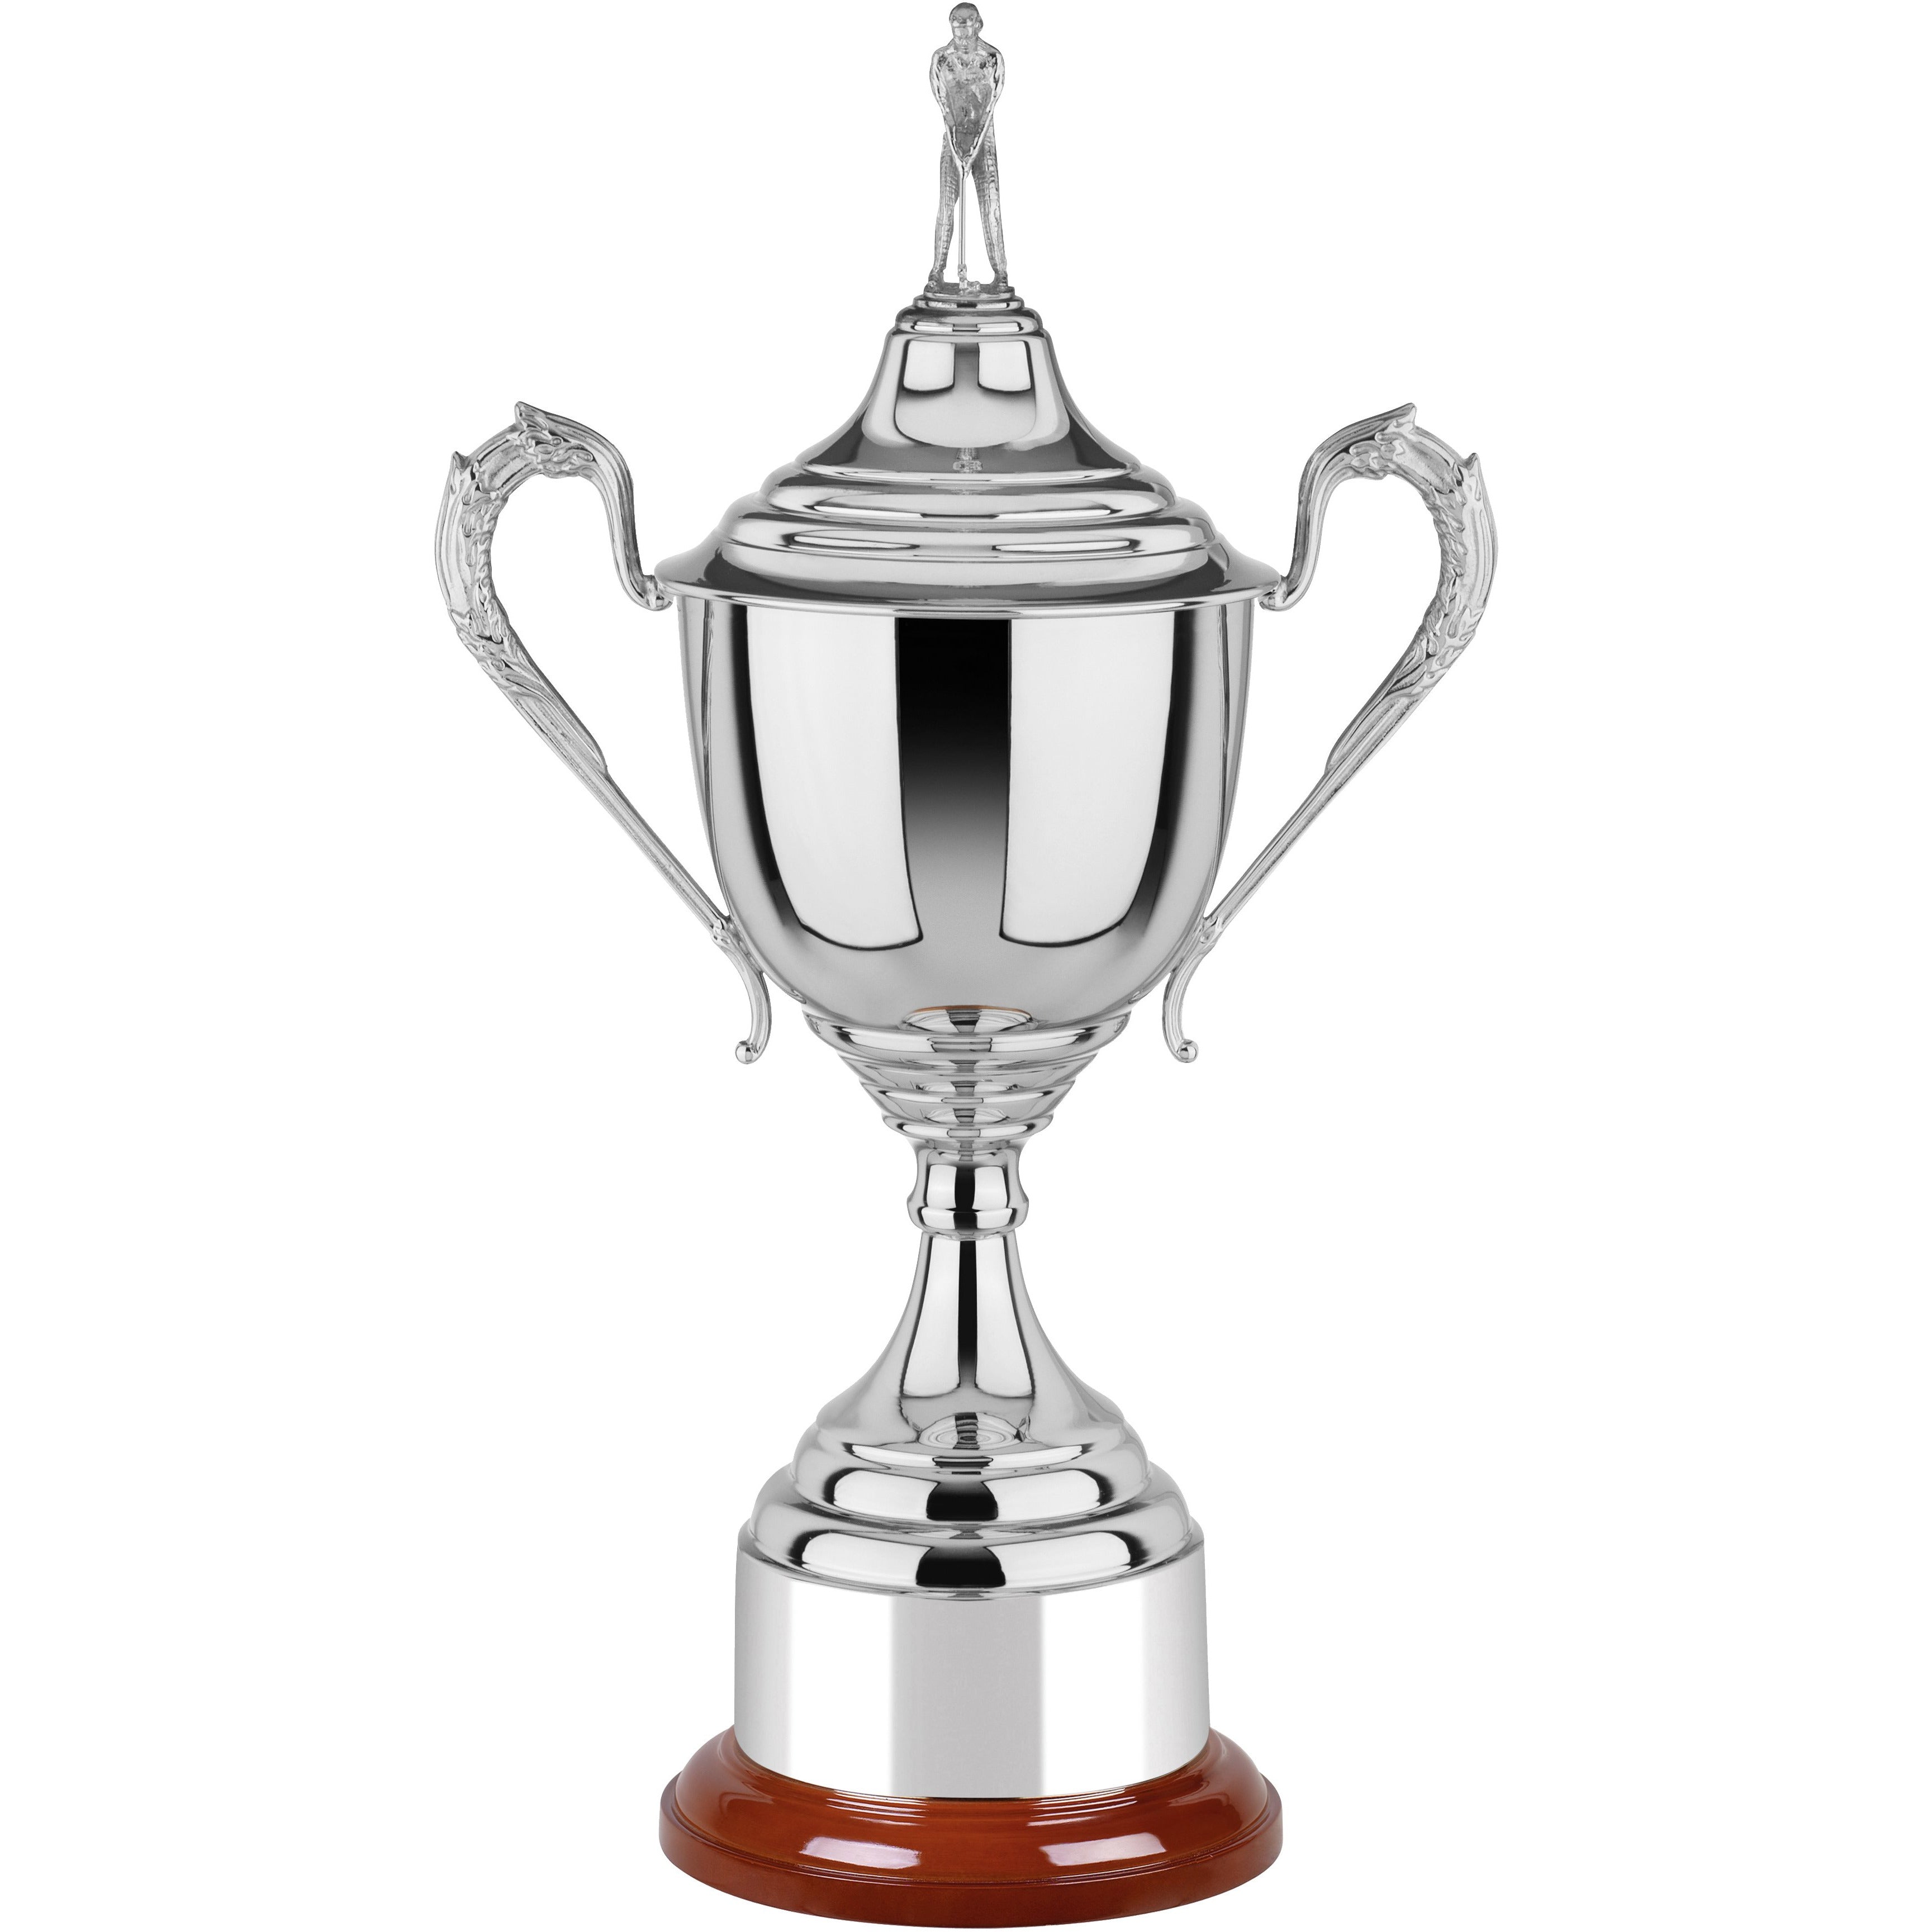 Nickel Plated Golf Cup Trophy with Lid